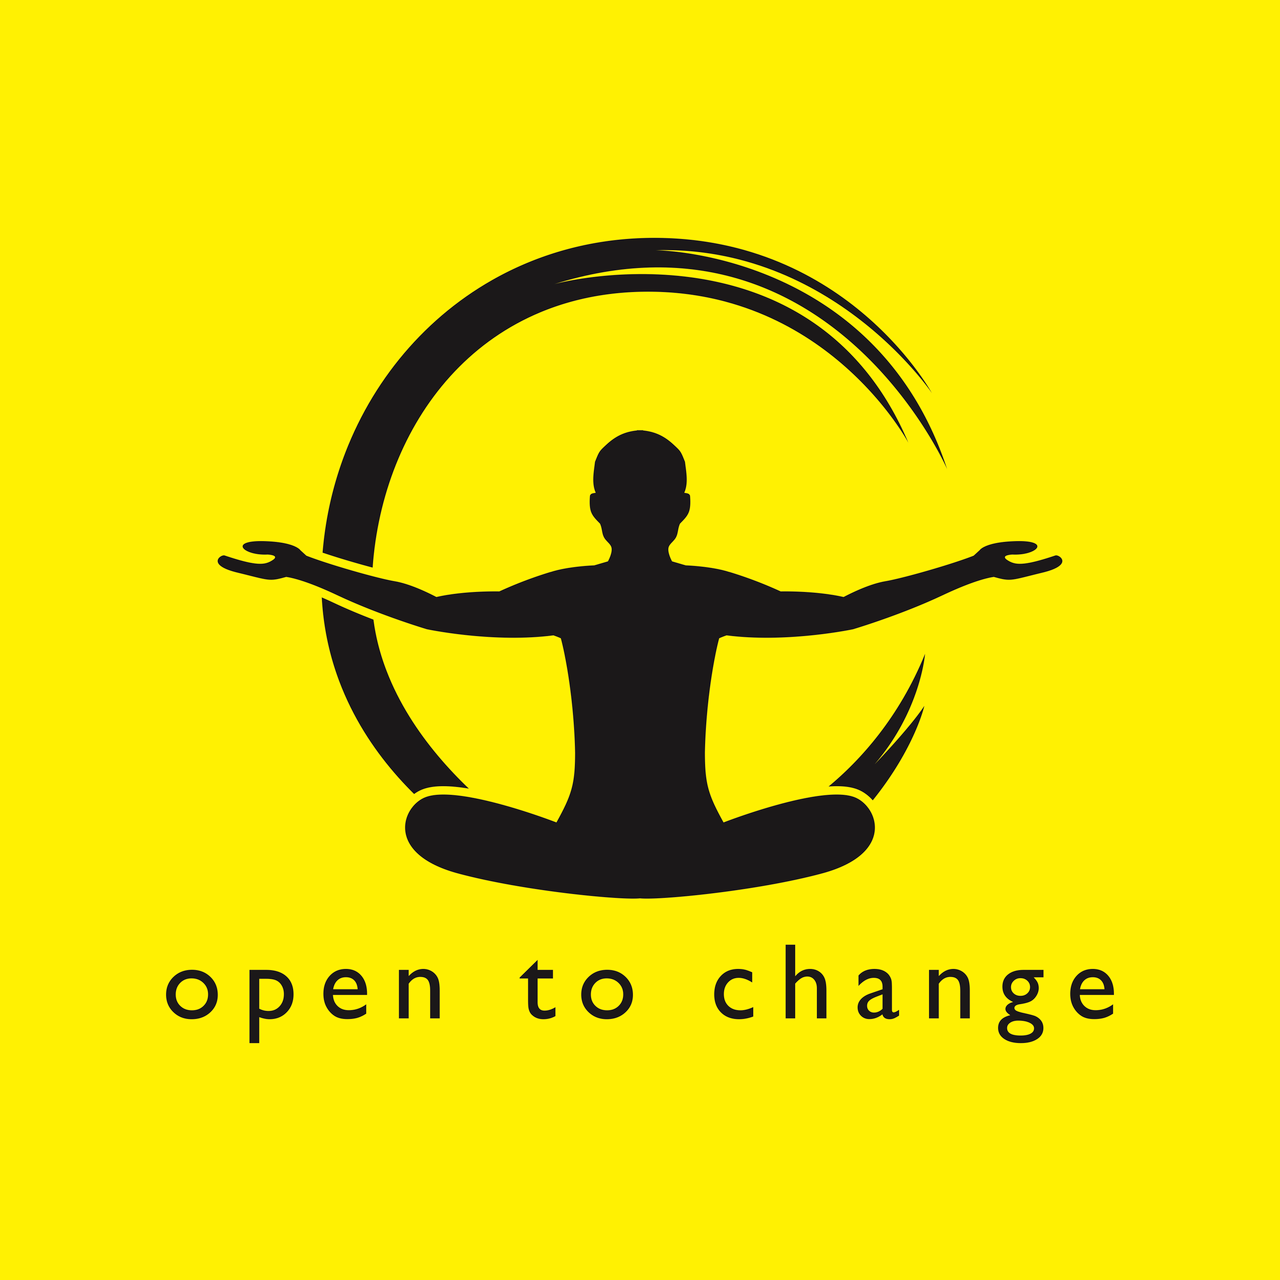 Artwork for open to change